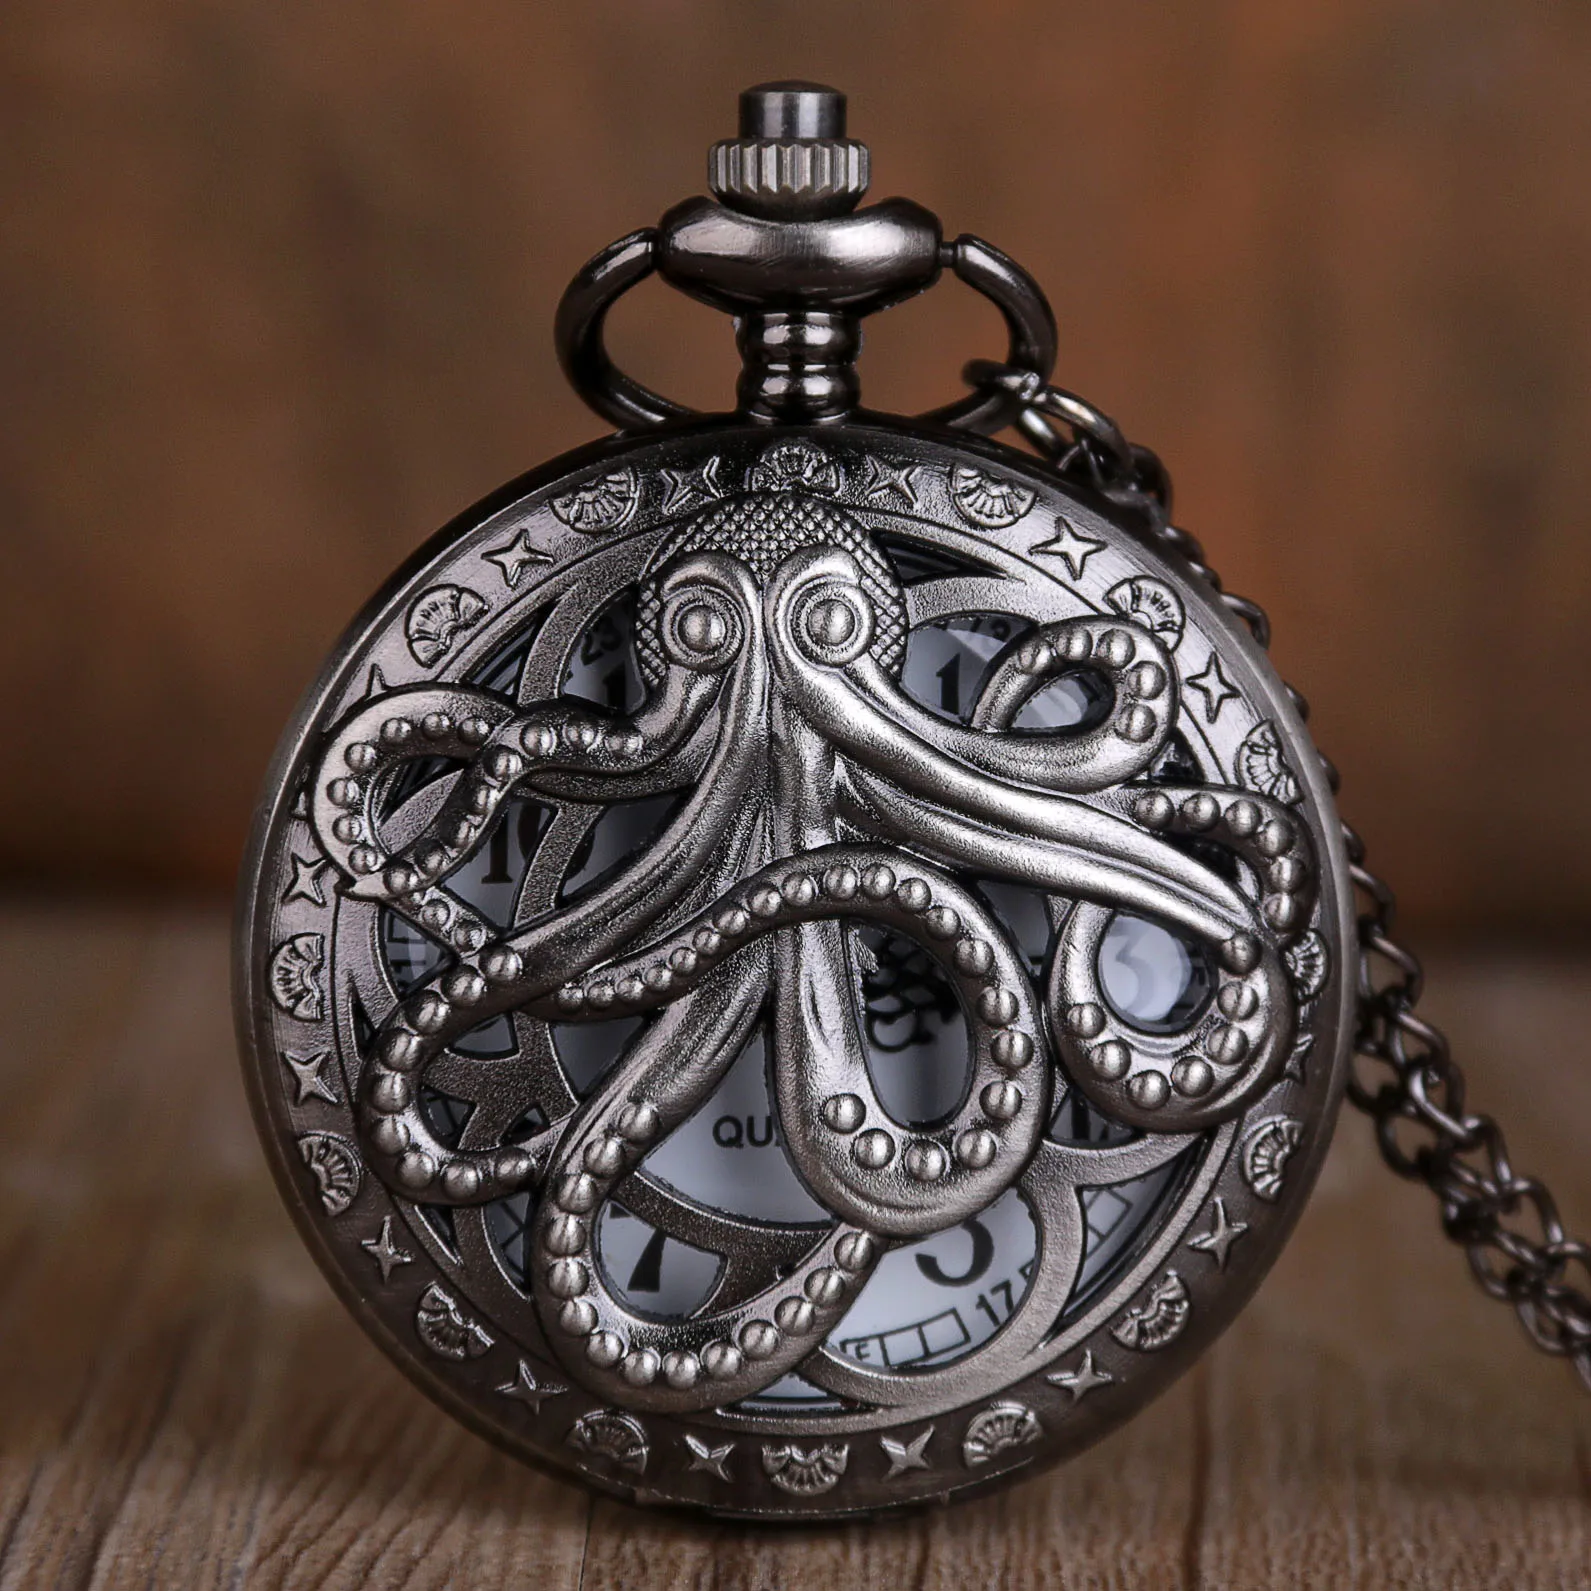 20pcs Free Shipping Octopus Hollow Half Hunter Quartz Pocket Watch Steampunk Black Pocket Watch Necklace Chain Gift for Kids enlarge